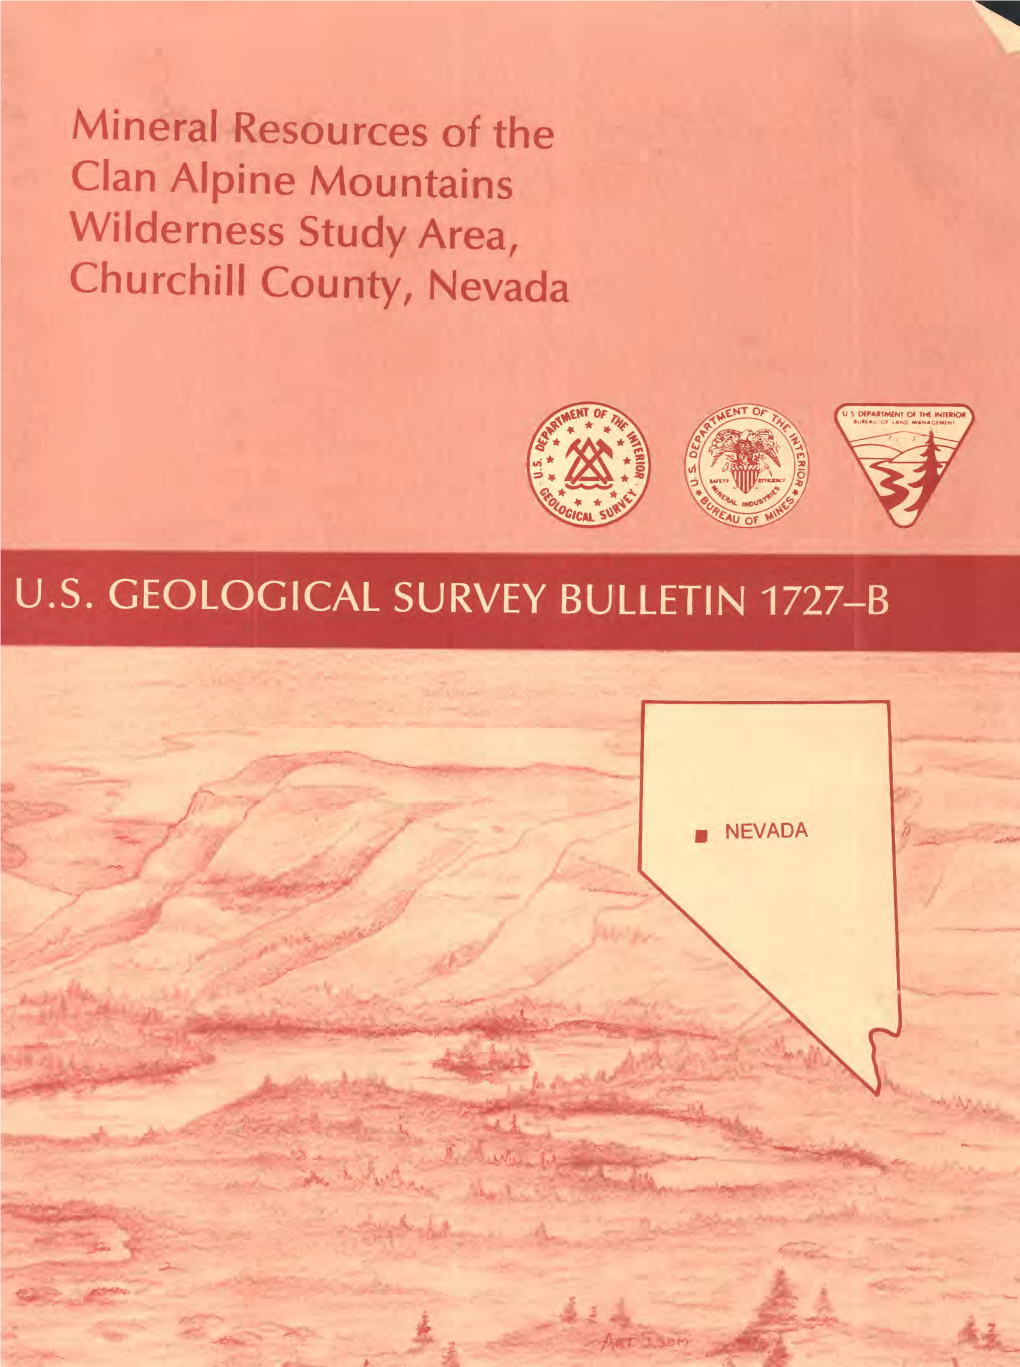 Mineral Resources of the Clan Alpine Mountains Wilderness Study Area, Churchill County, Nevada